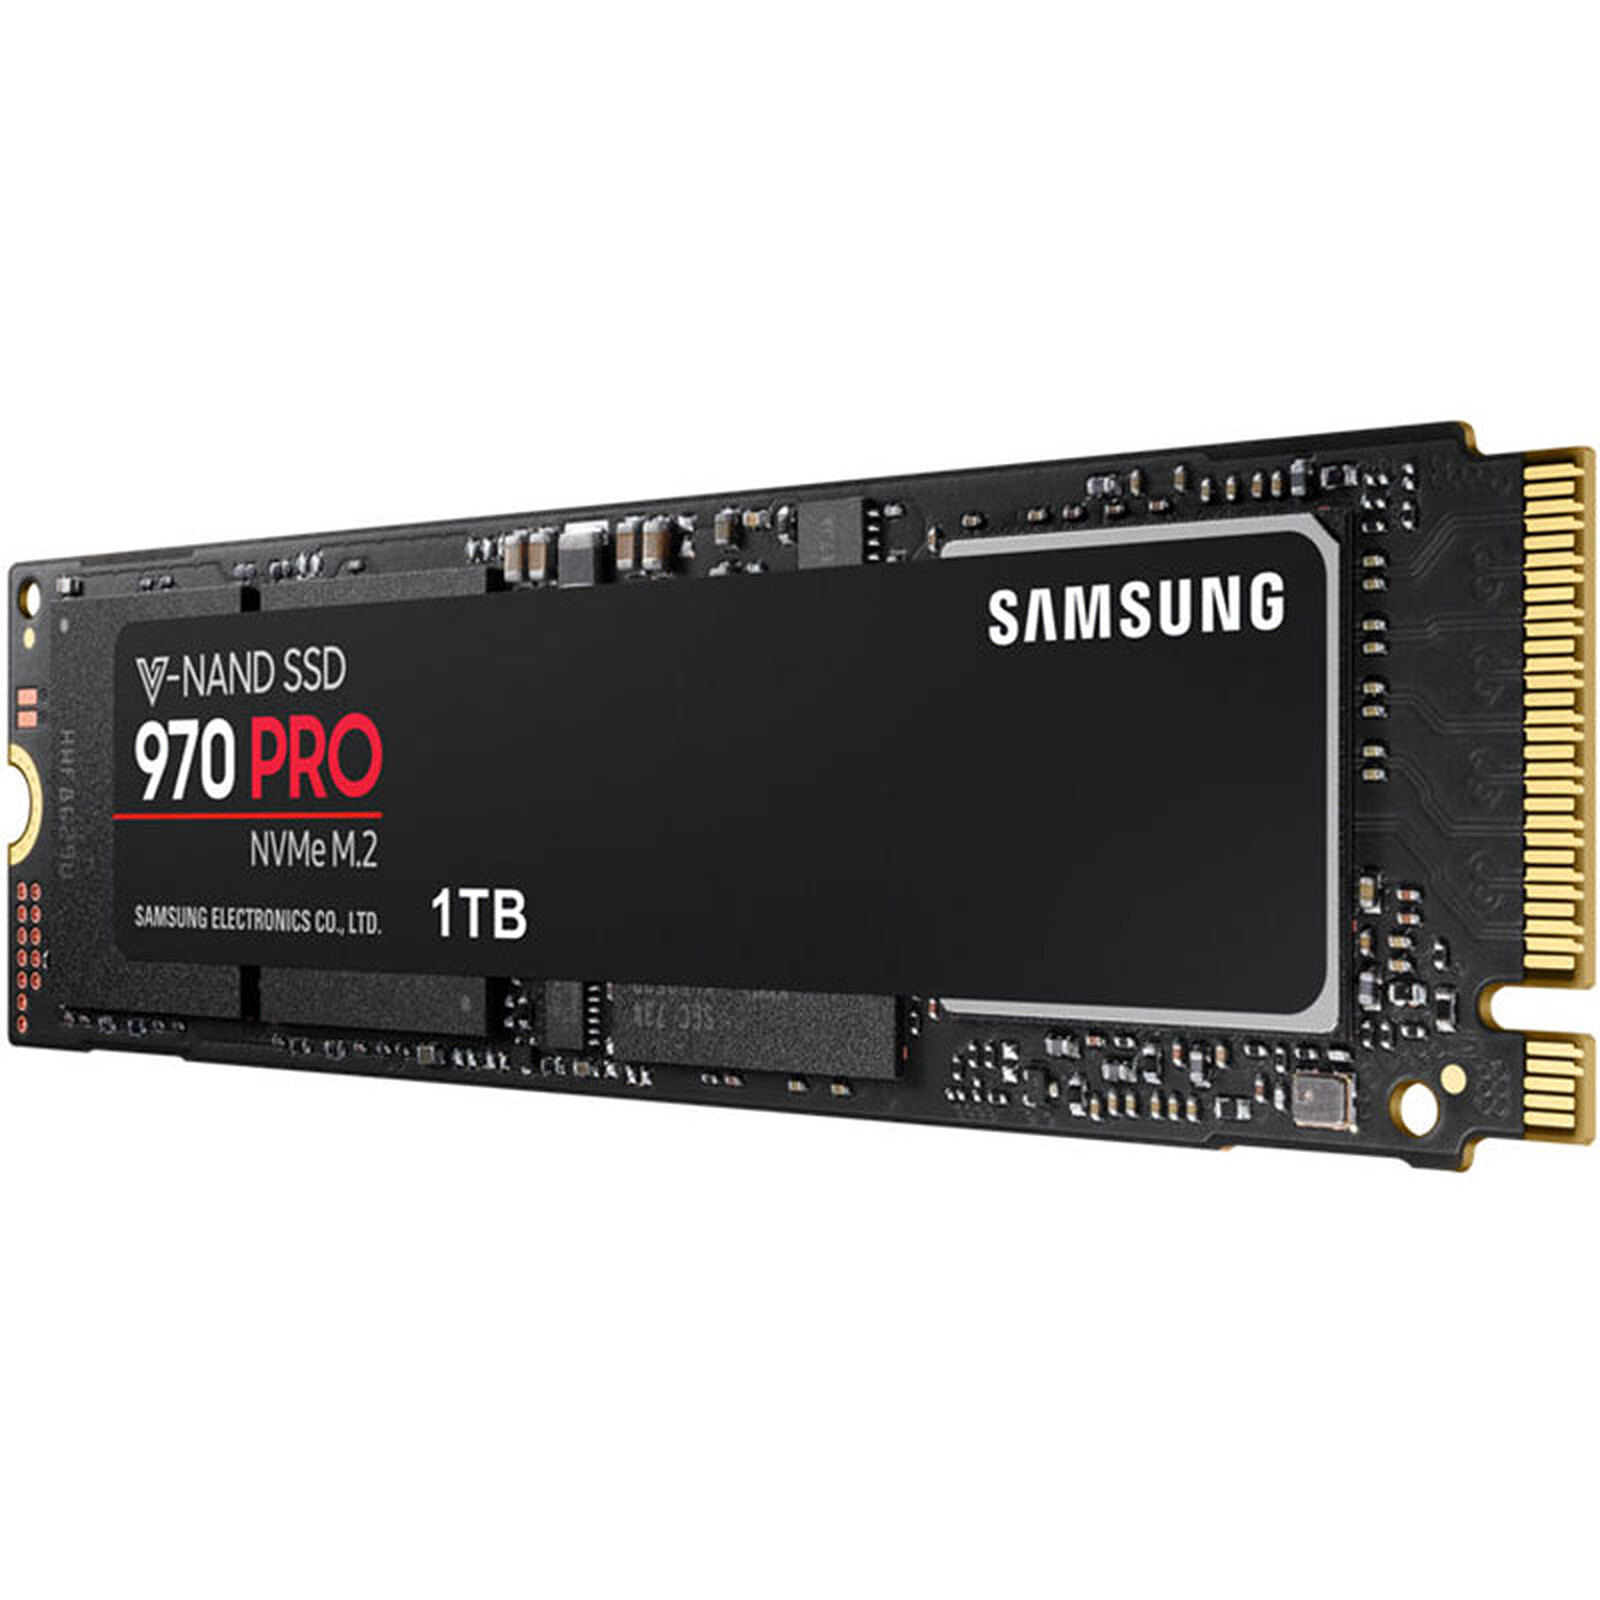 Samsung SSD 870 QVO 1 To - Disque SSD - LDLC